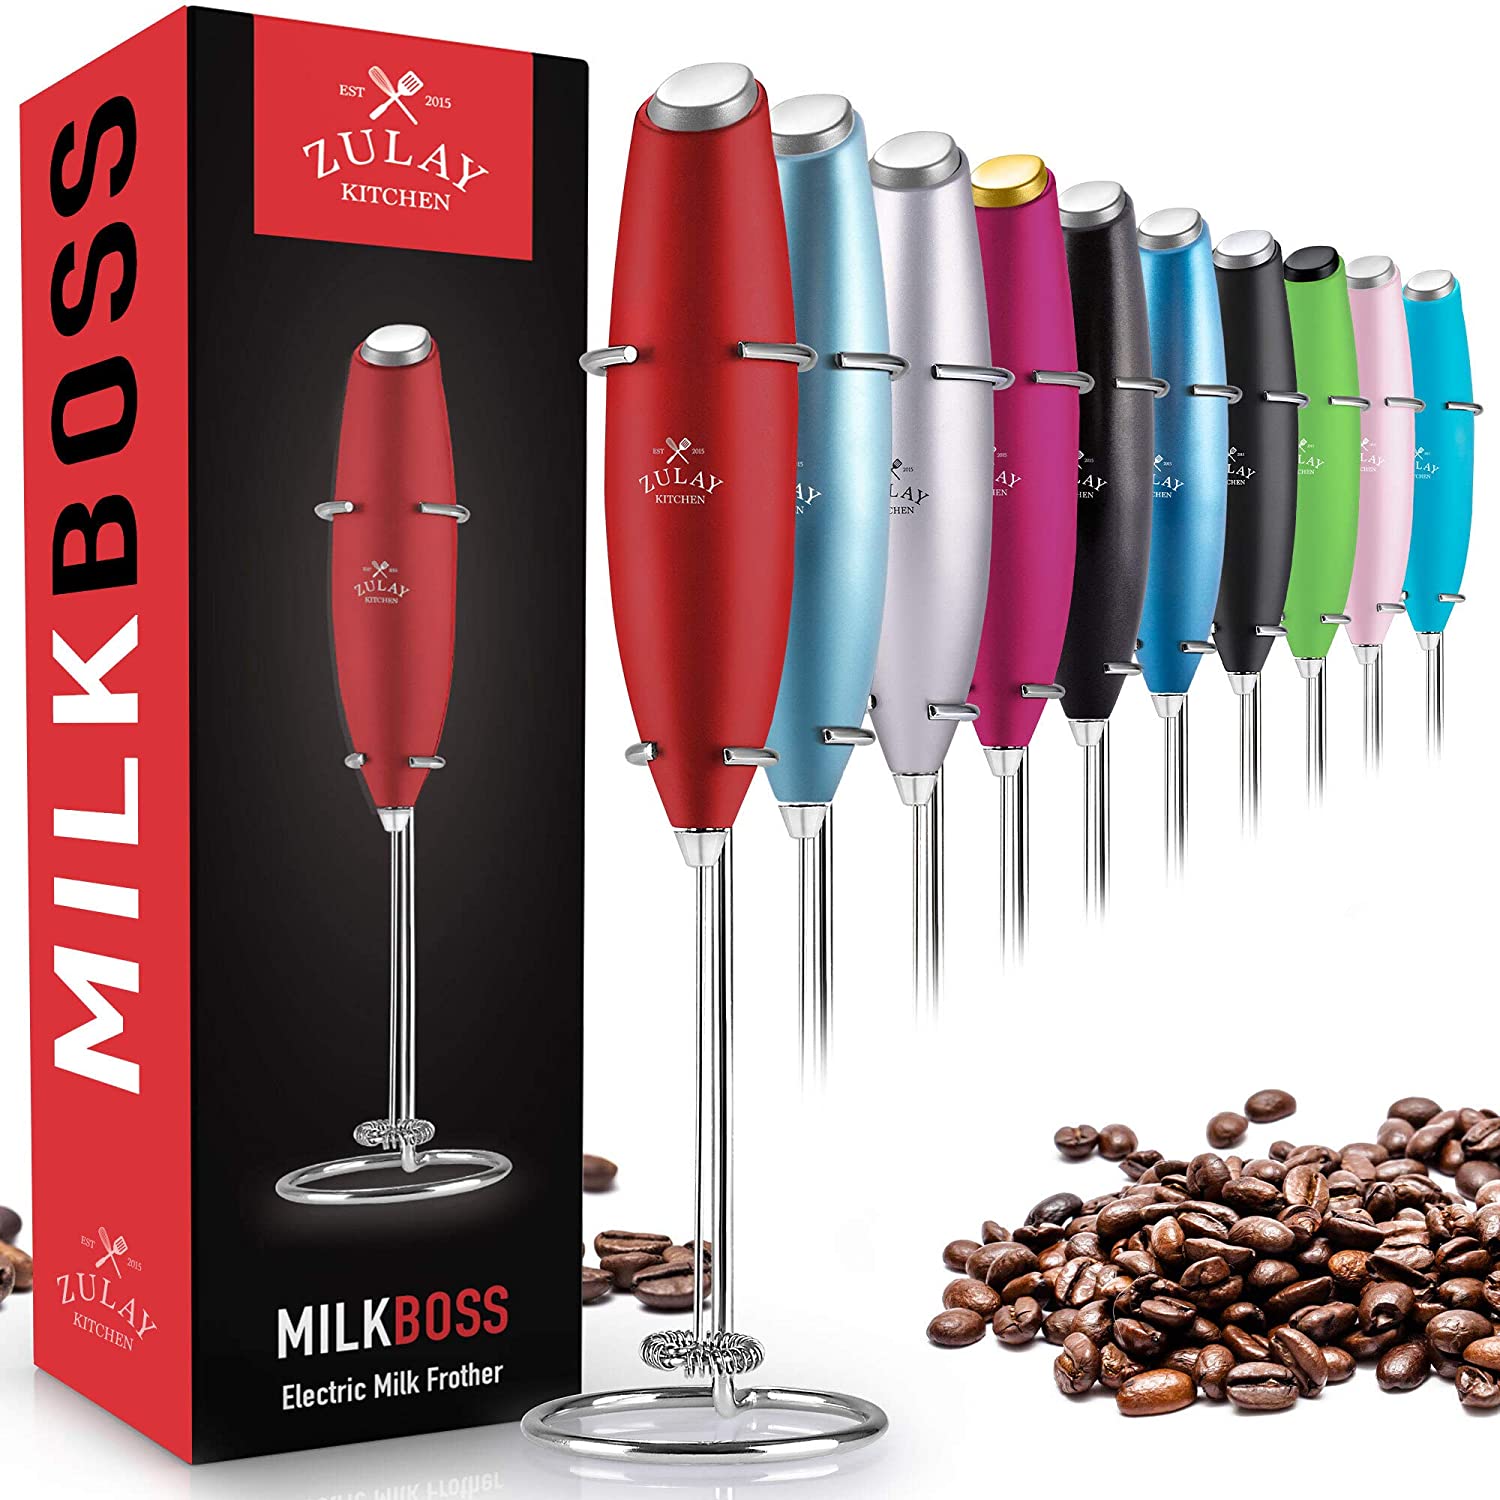 Zulay Kitchen Milk Boss Milk Frother With Holster Stand - Red, 1